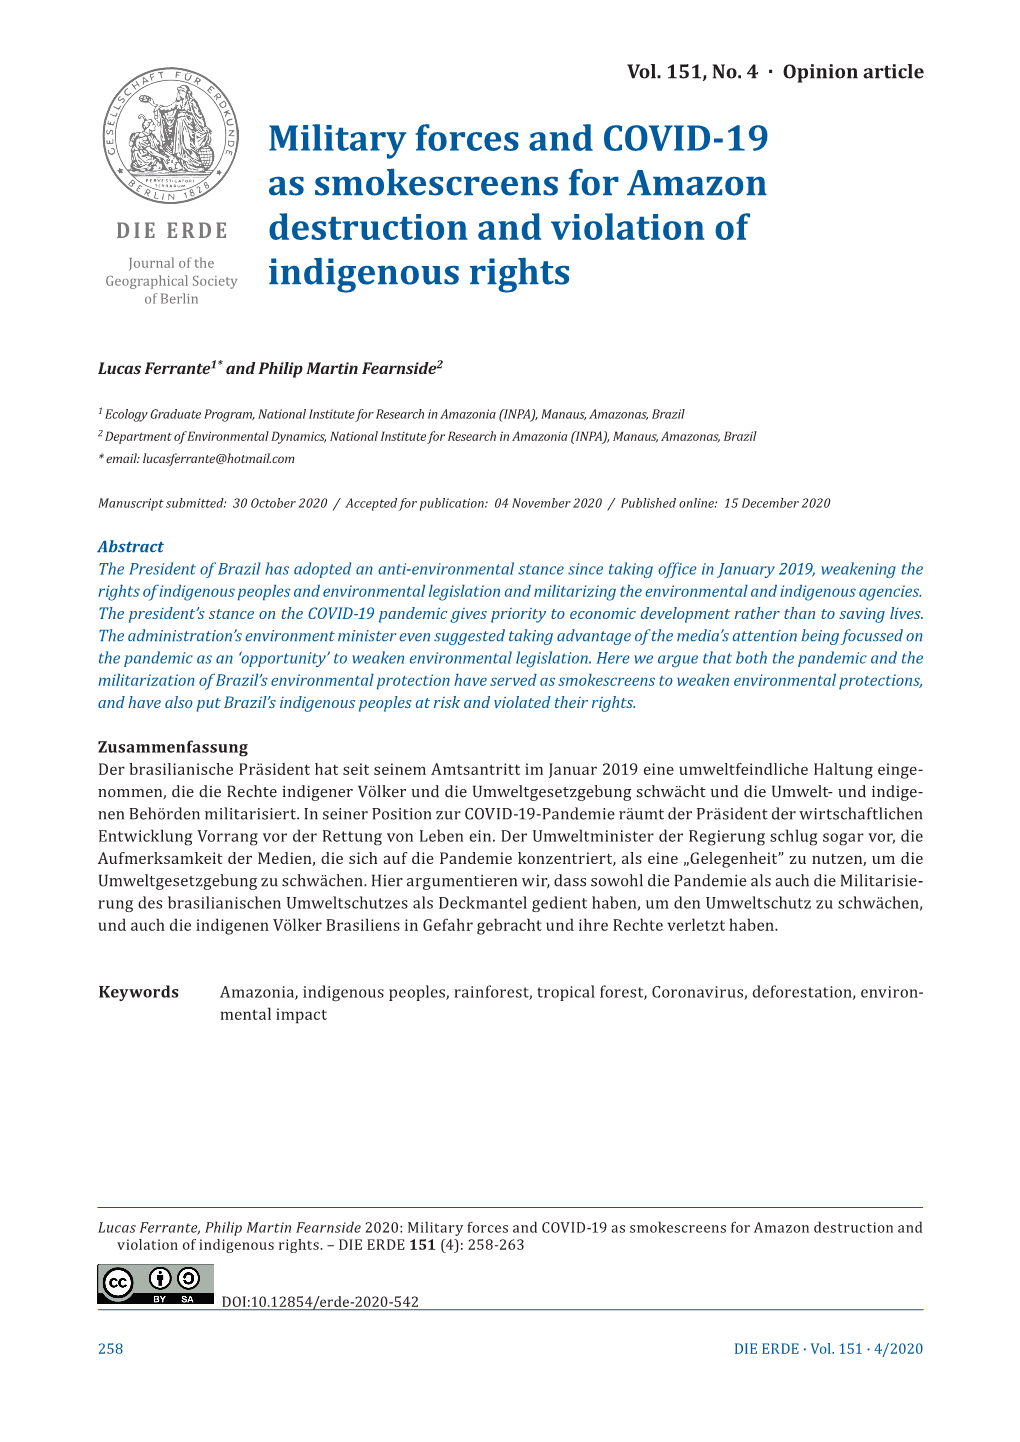 Military Forces and COVID-19 As Smokescreens for Amazon DIE ERDE Destruction and Violation of Journal of the Geographical Society Indigenous Rights of Berlin